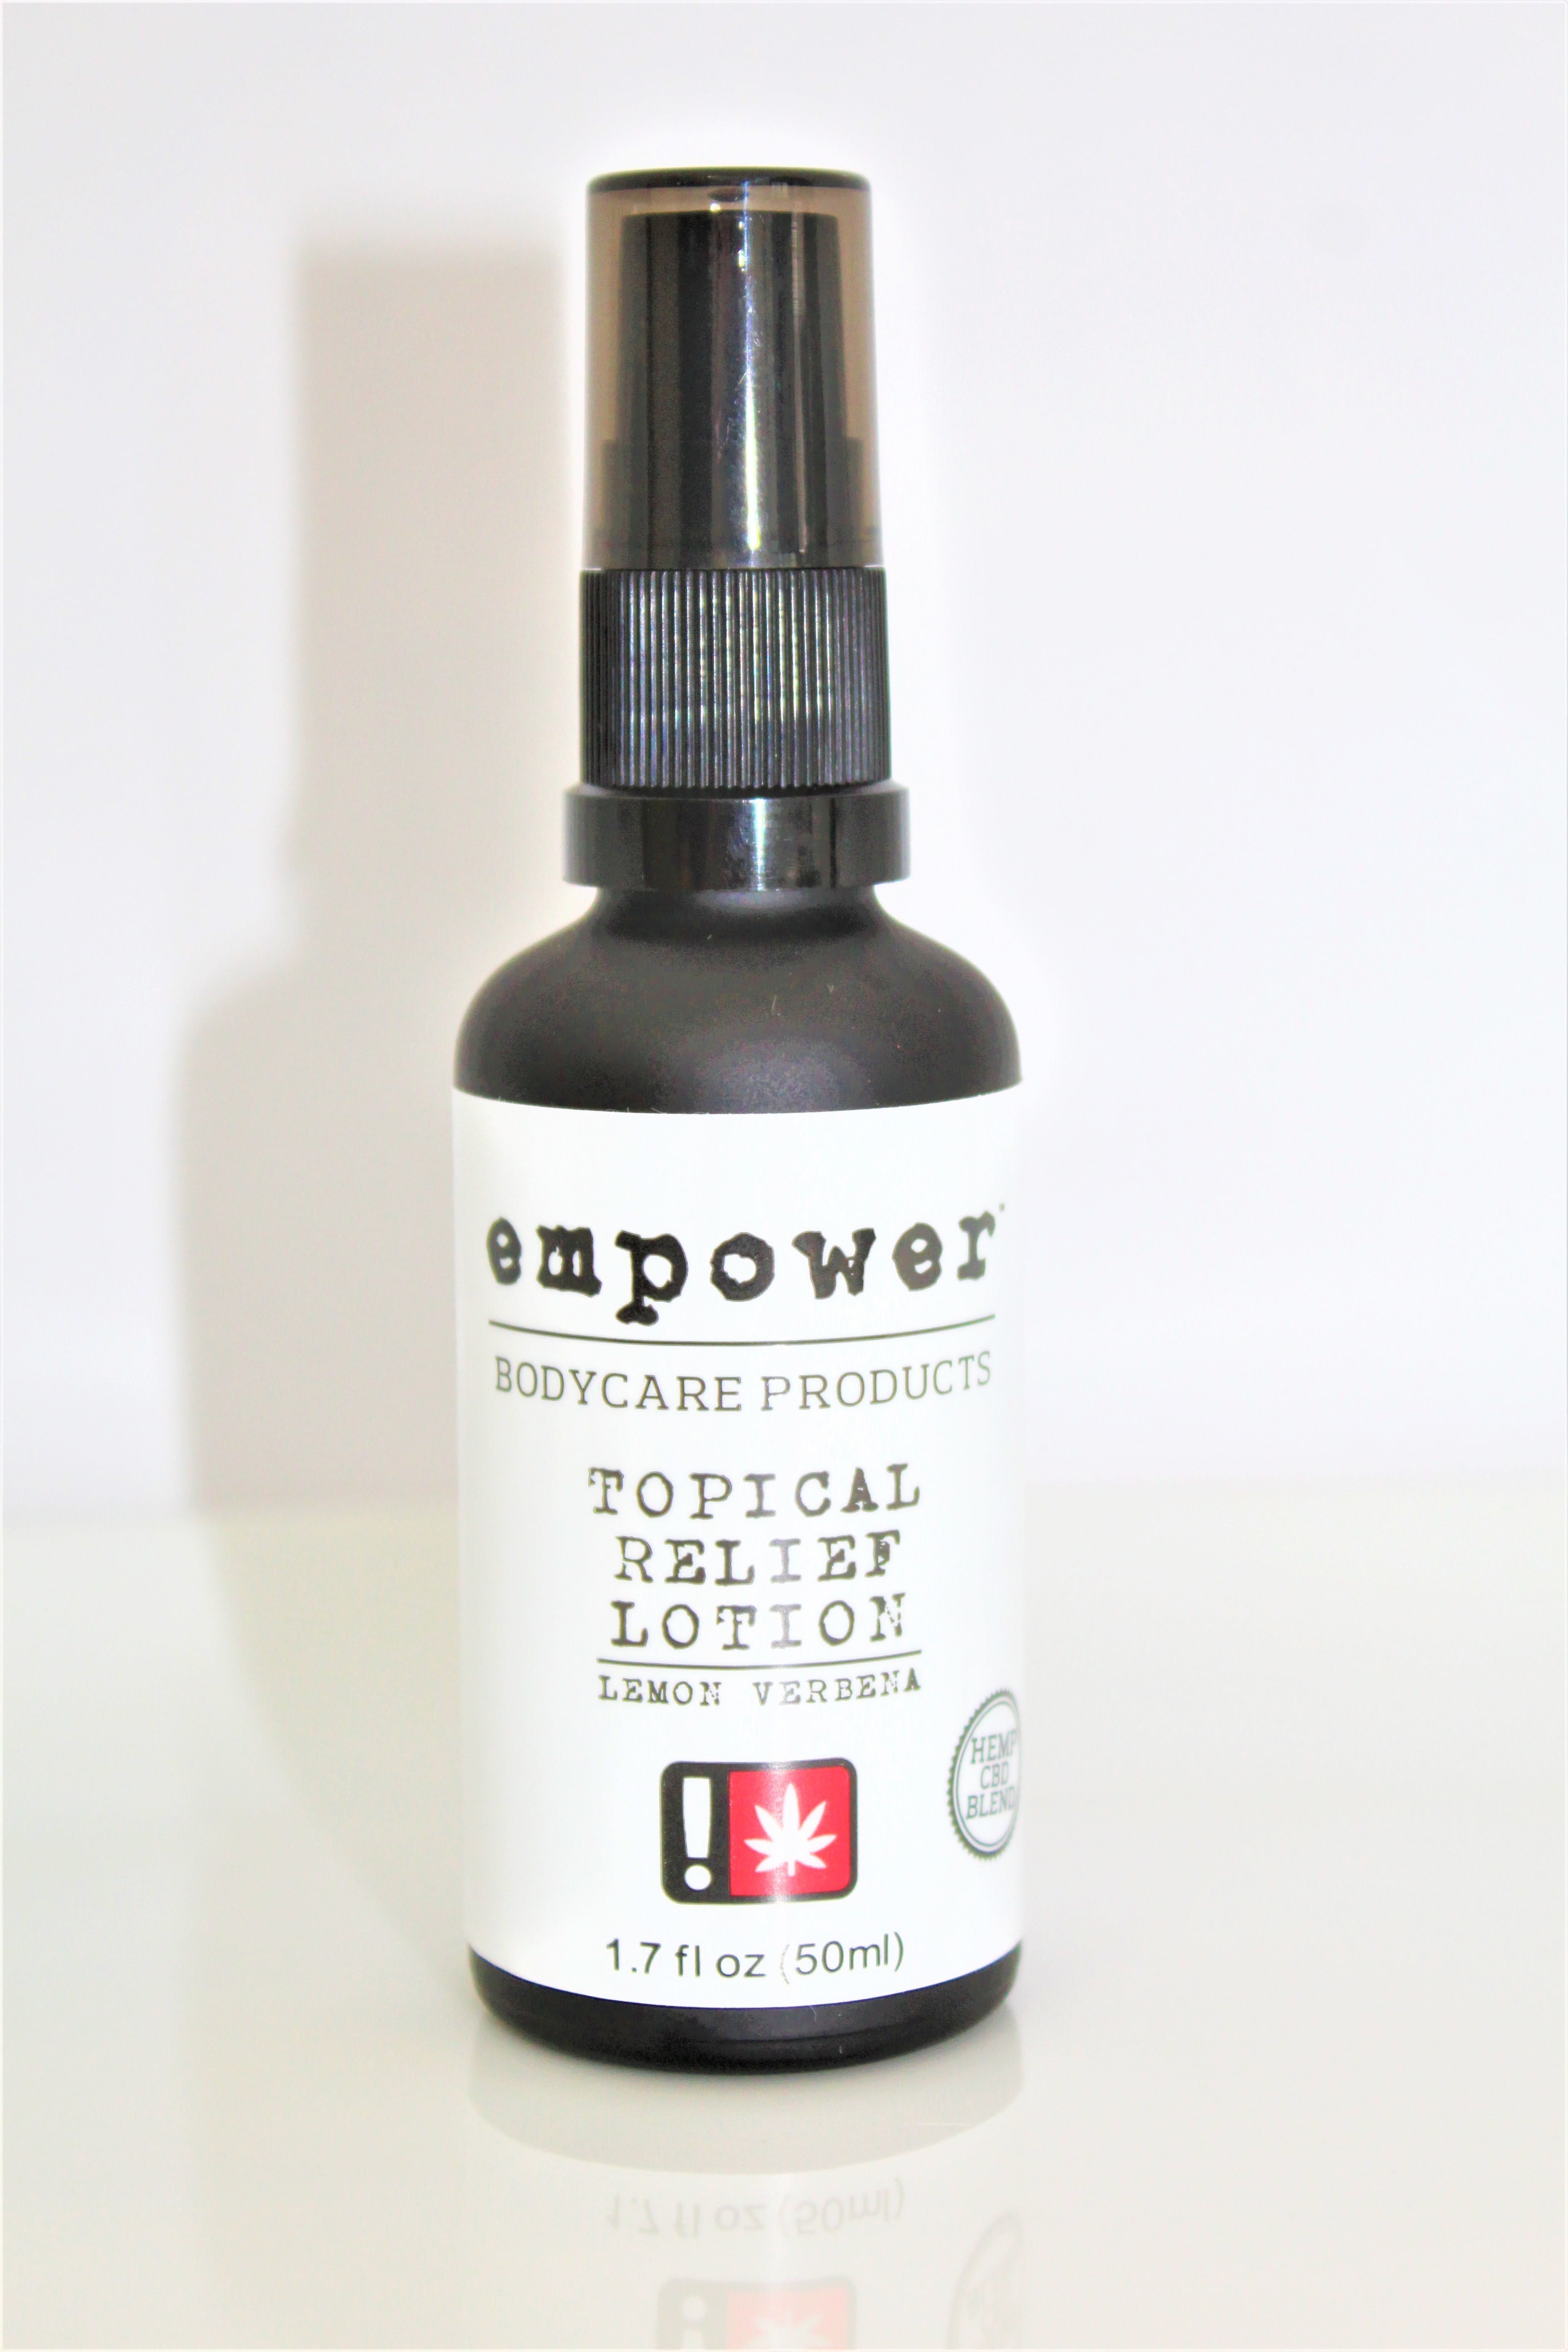 marijuana-dispensaries-the-agrestic-north-in-corvallis-white-label-topical-relief-lotion-50ml-185-5mg-cbd-empower